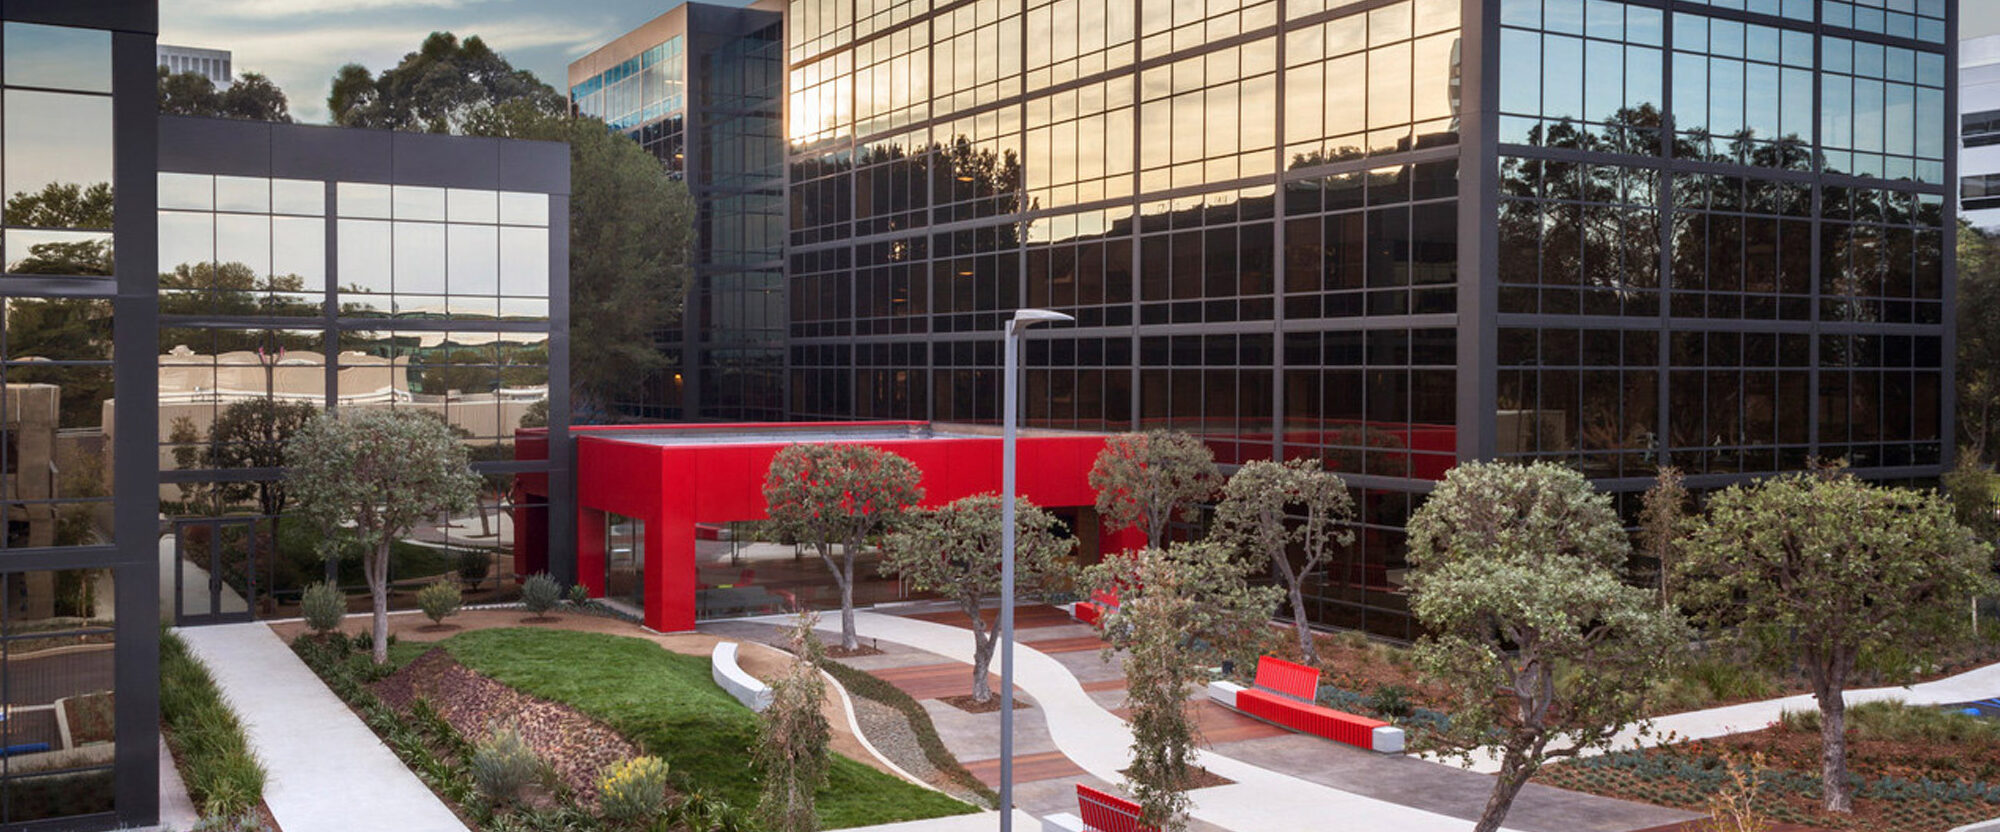 Modern office building exterior featuring geometric glass facade; fronted by vibrant red entrance structure; landscaped with manicured trees and concrete walkways, amidst a backdrop of lush greenery.